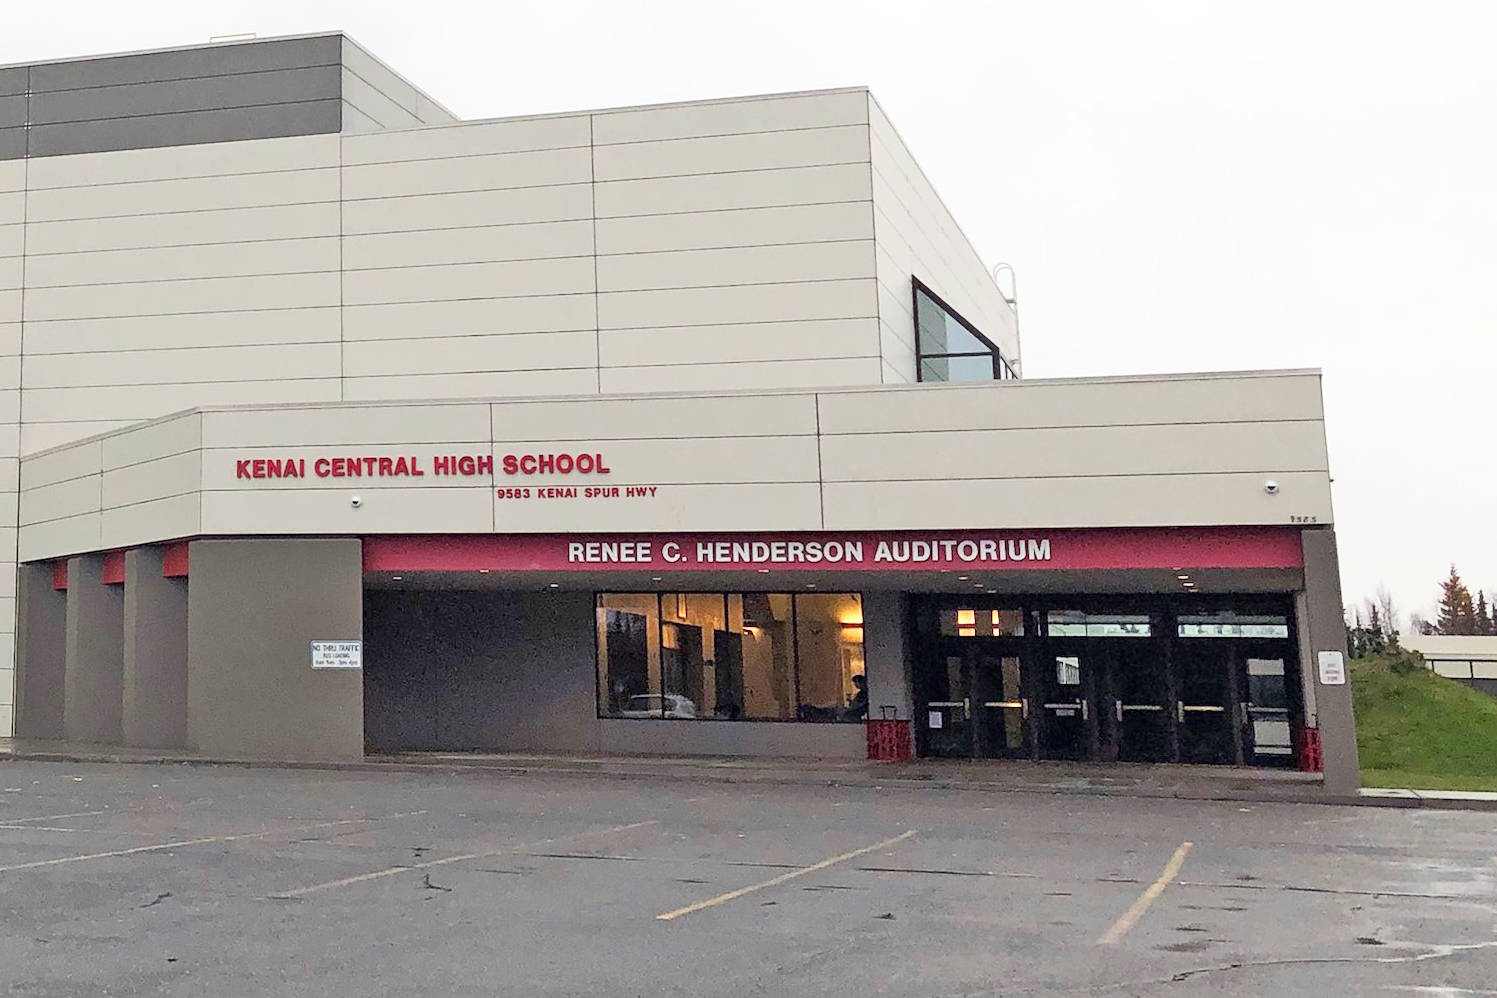 Kenai Central High School is photographed on Tuesday, Oct. 23, 2018, in Kenai, Alaska. (Photo by Victoria Petersen/Peninsula Clarion)